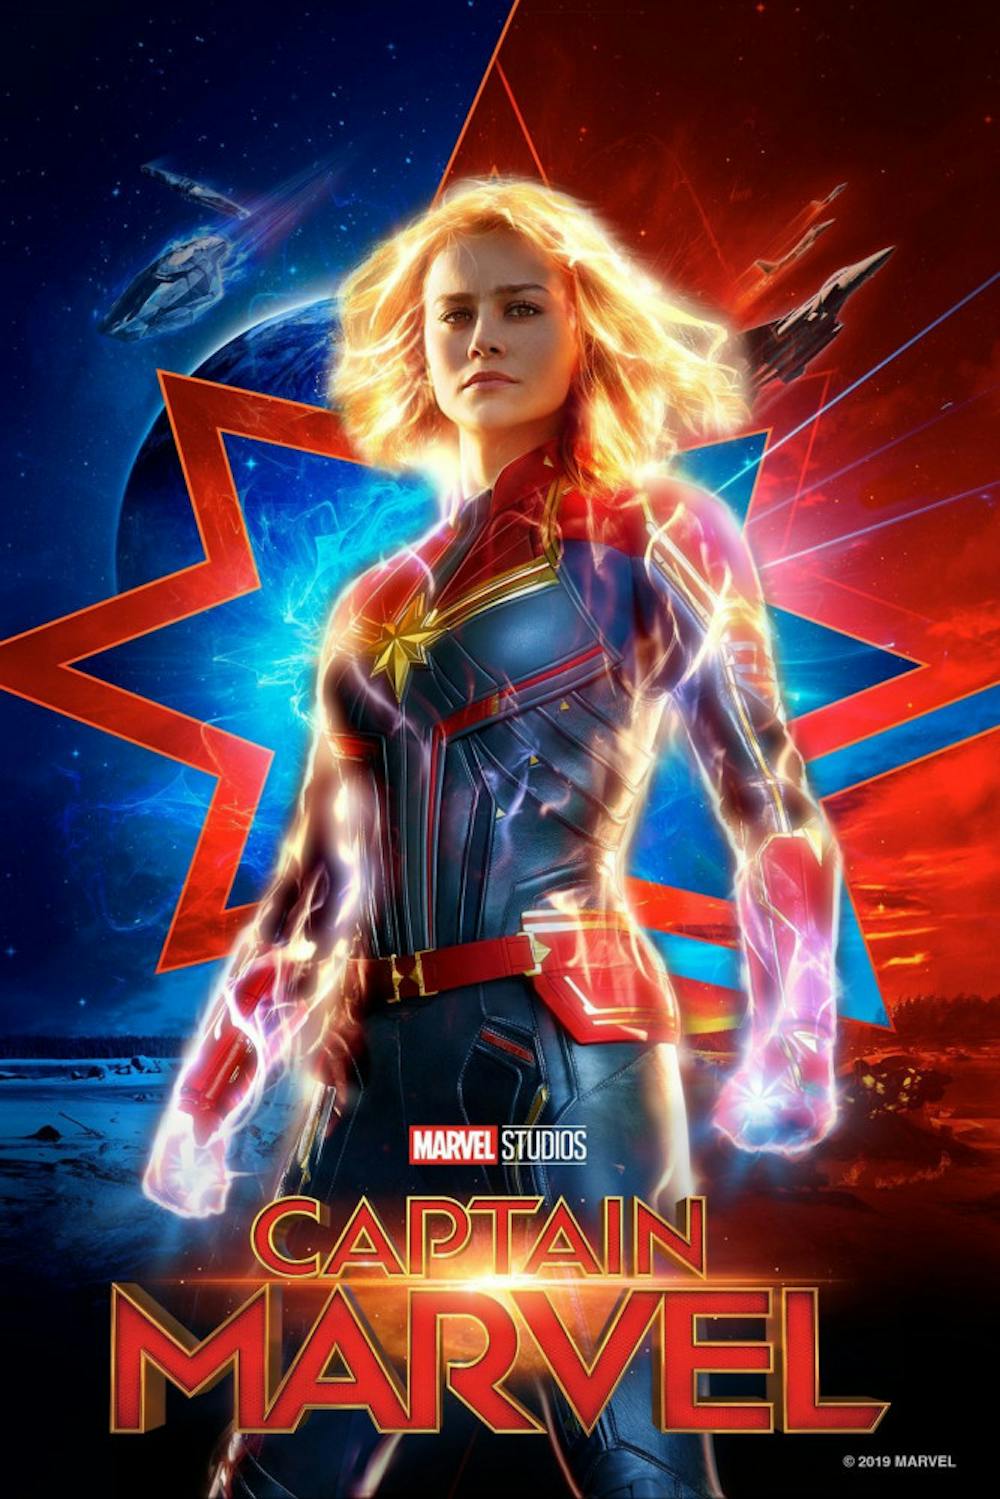 <p>Brie Larson takes on the role of the hero Carol Danvers in Marvel's newest film "Captain Marvel."</p>